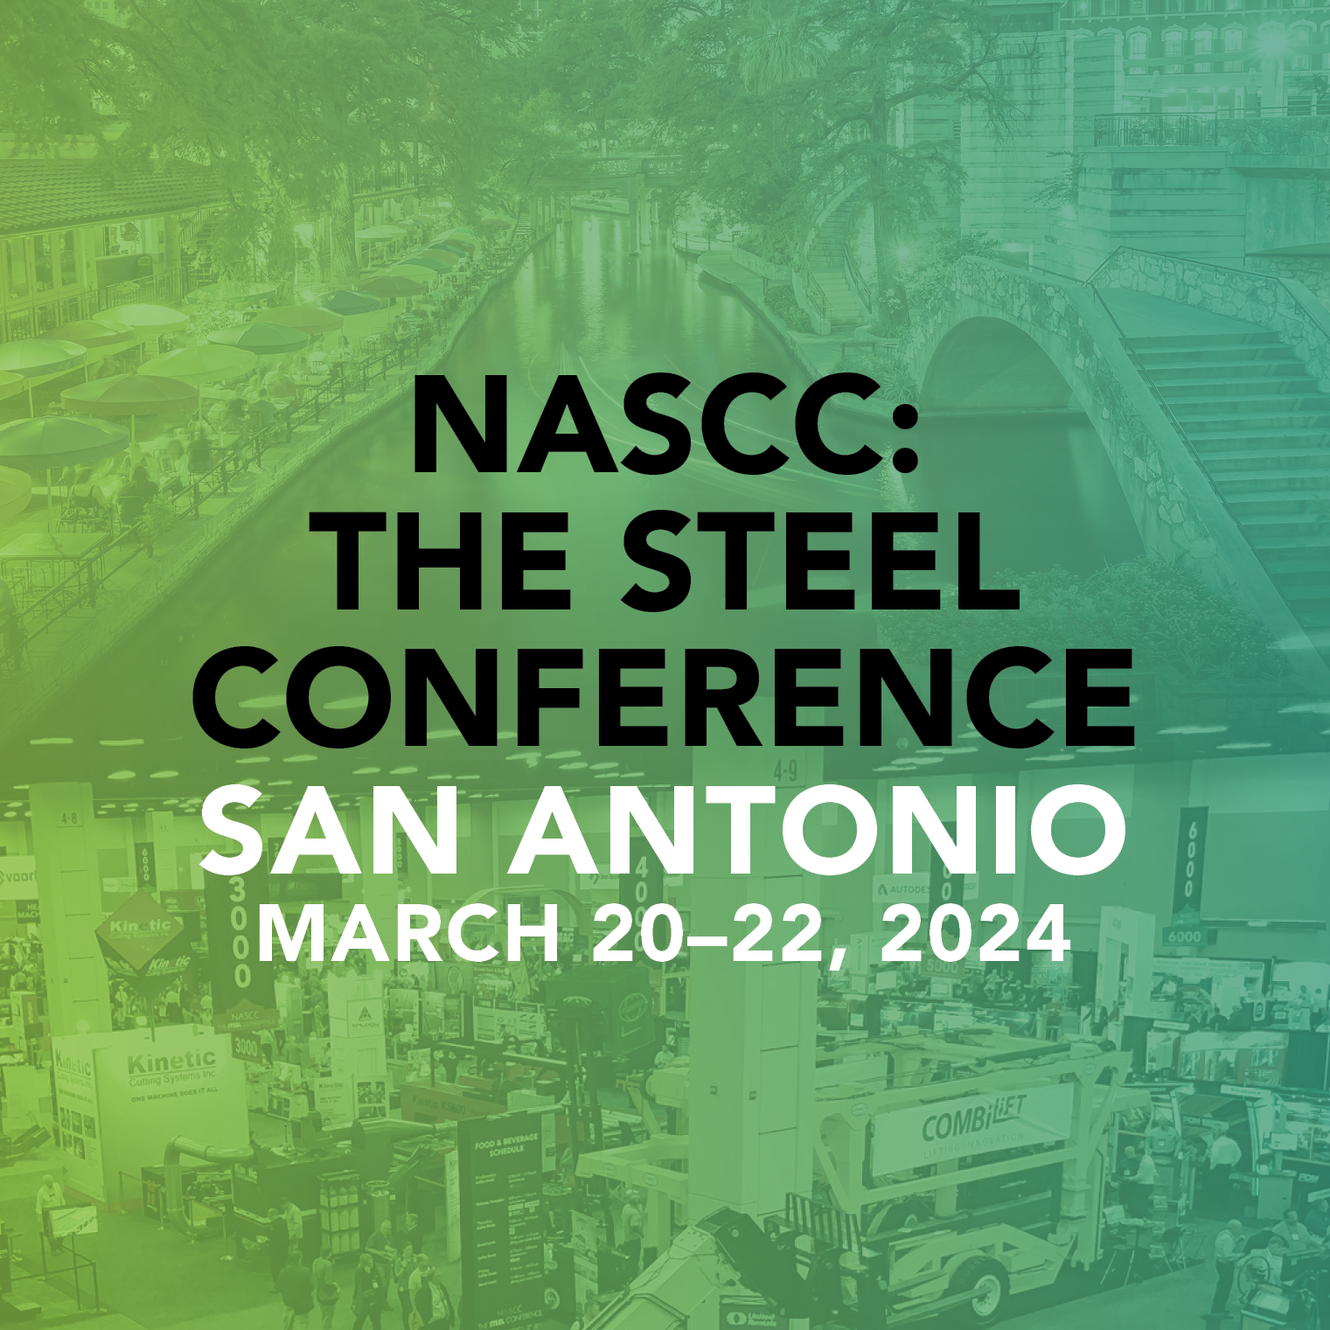 NASCC: The Steel Conference 2024